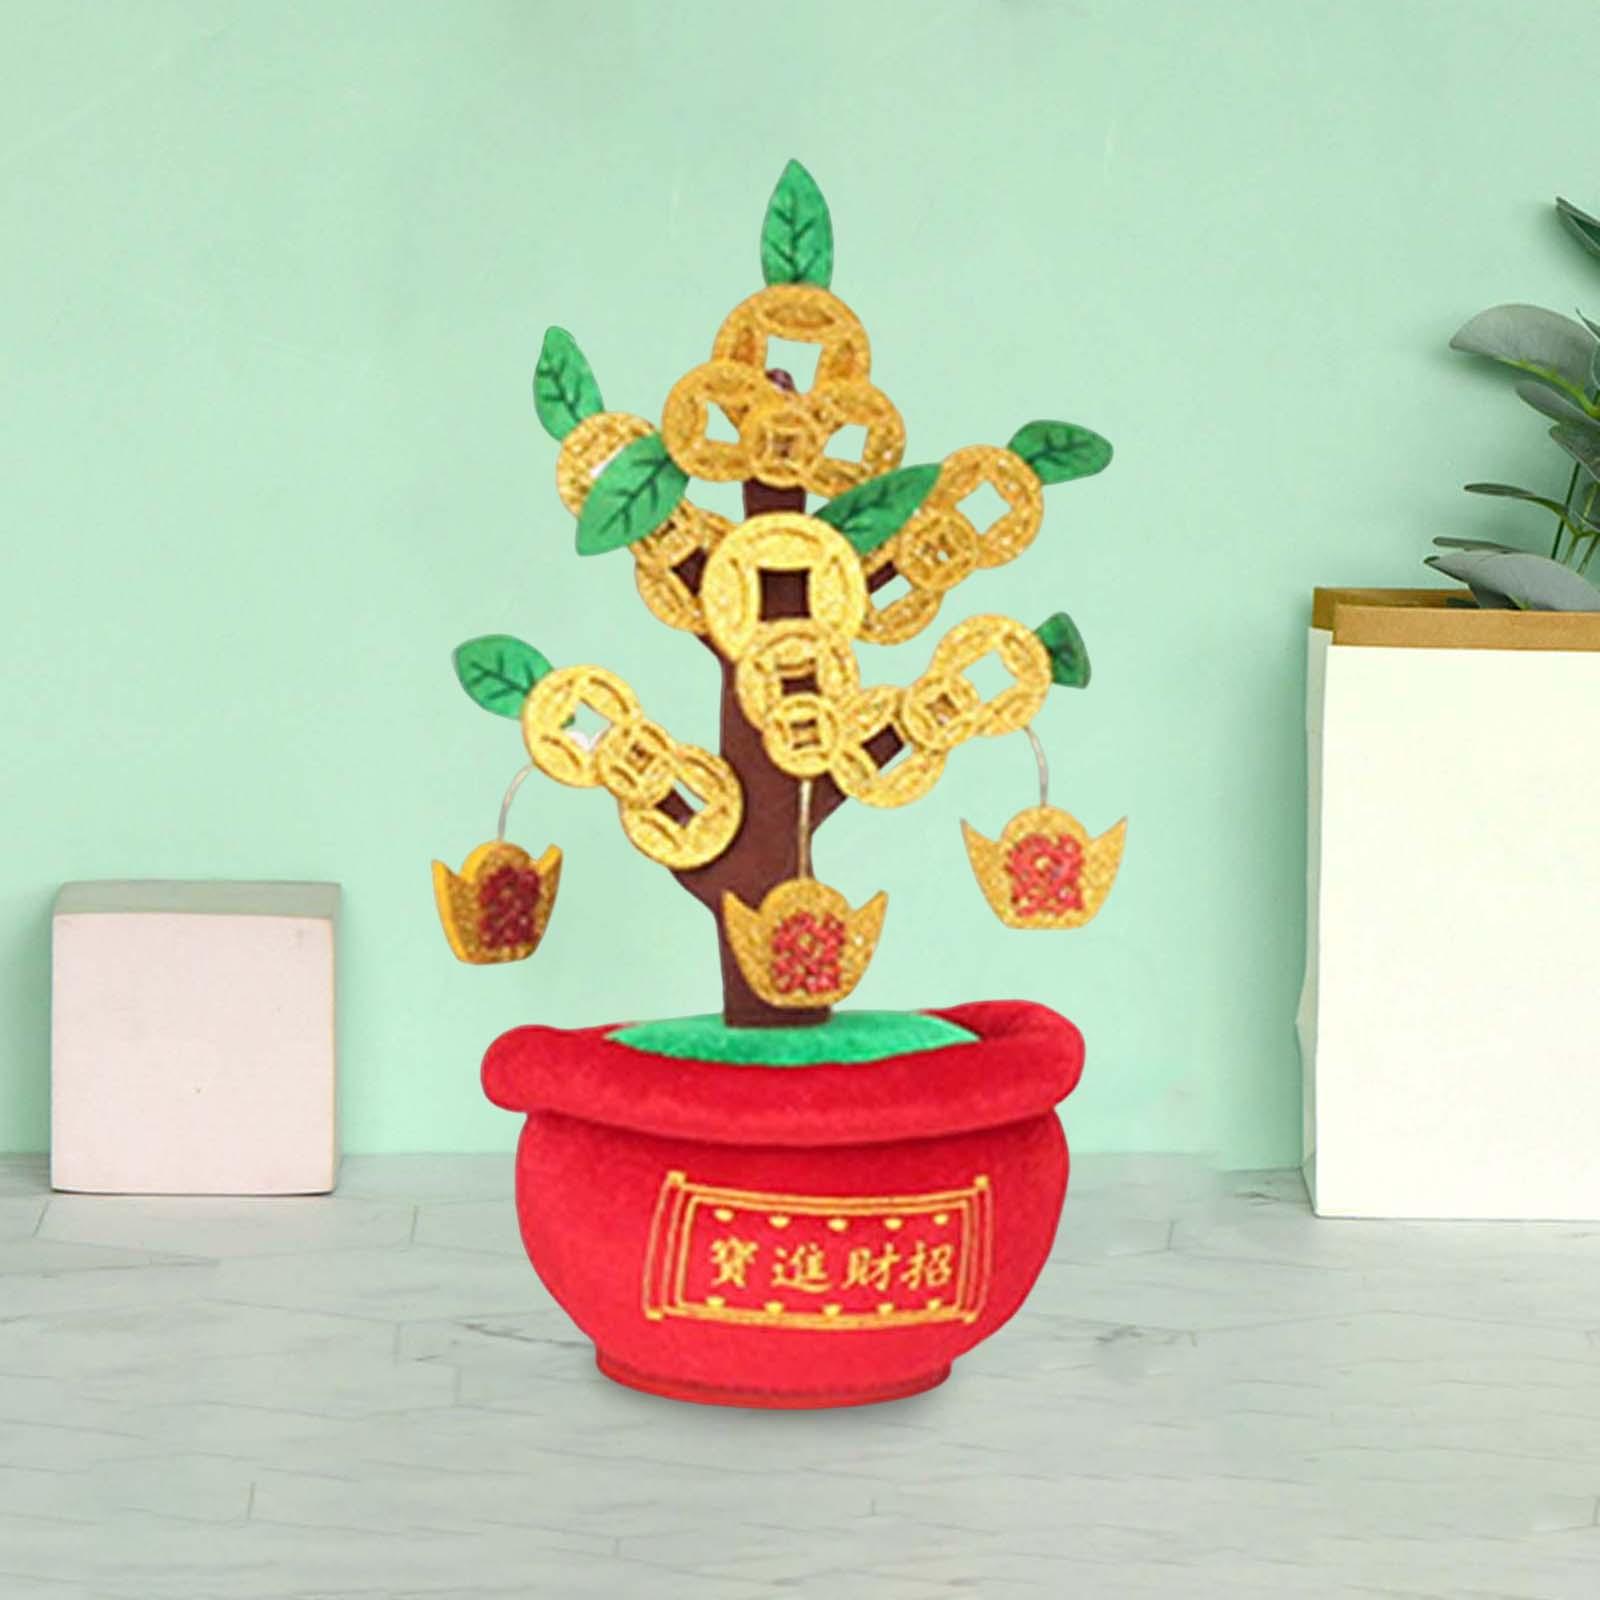 Chinese Artificial Bonsai Money Tree Decoration for Spring Festival Decor S